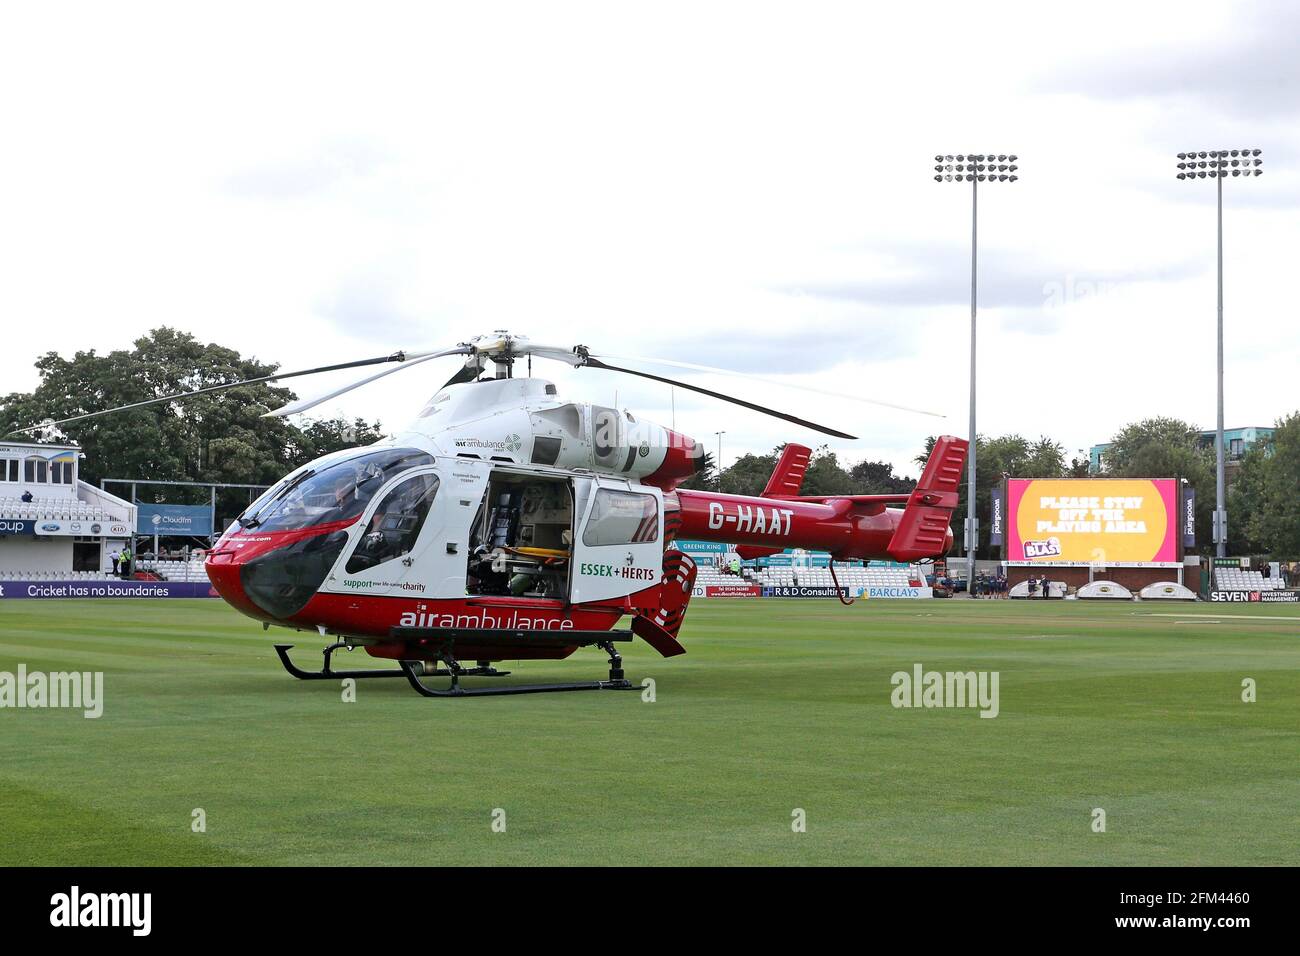 The Essex & Herts Air Ambulance on the outfield as the start of the match is delayed ahead of Essex Eagles vs Kent Spitfires, NatWest T20 Blast Cricke Stock Photo